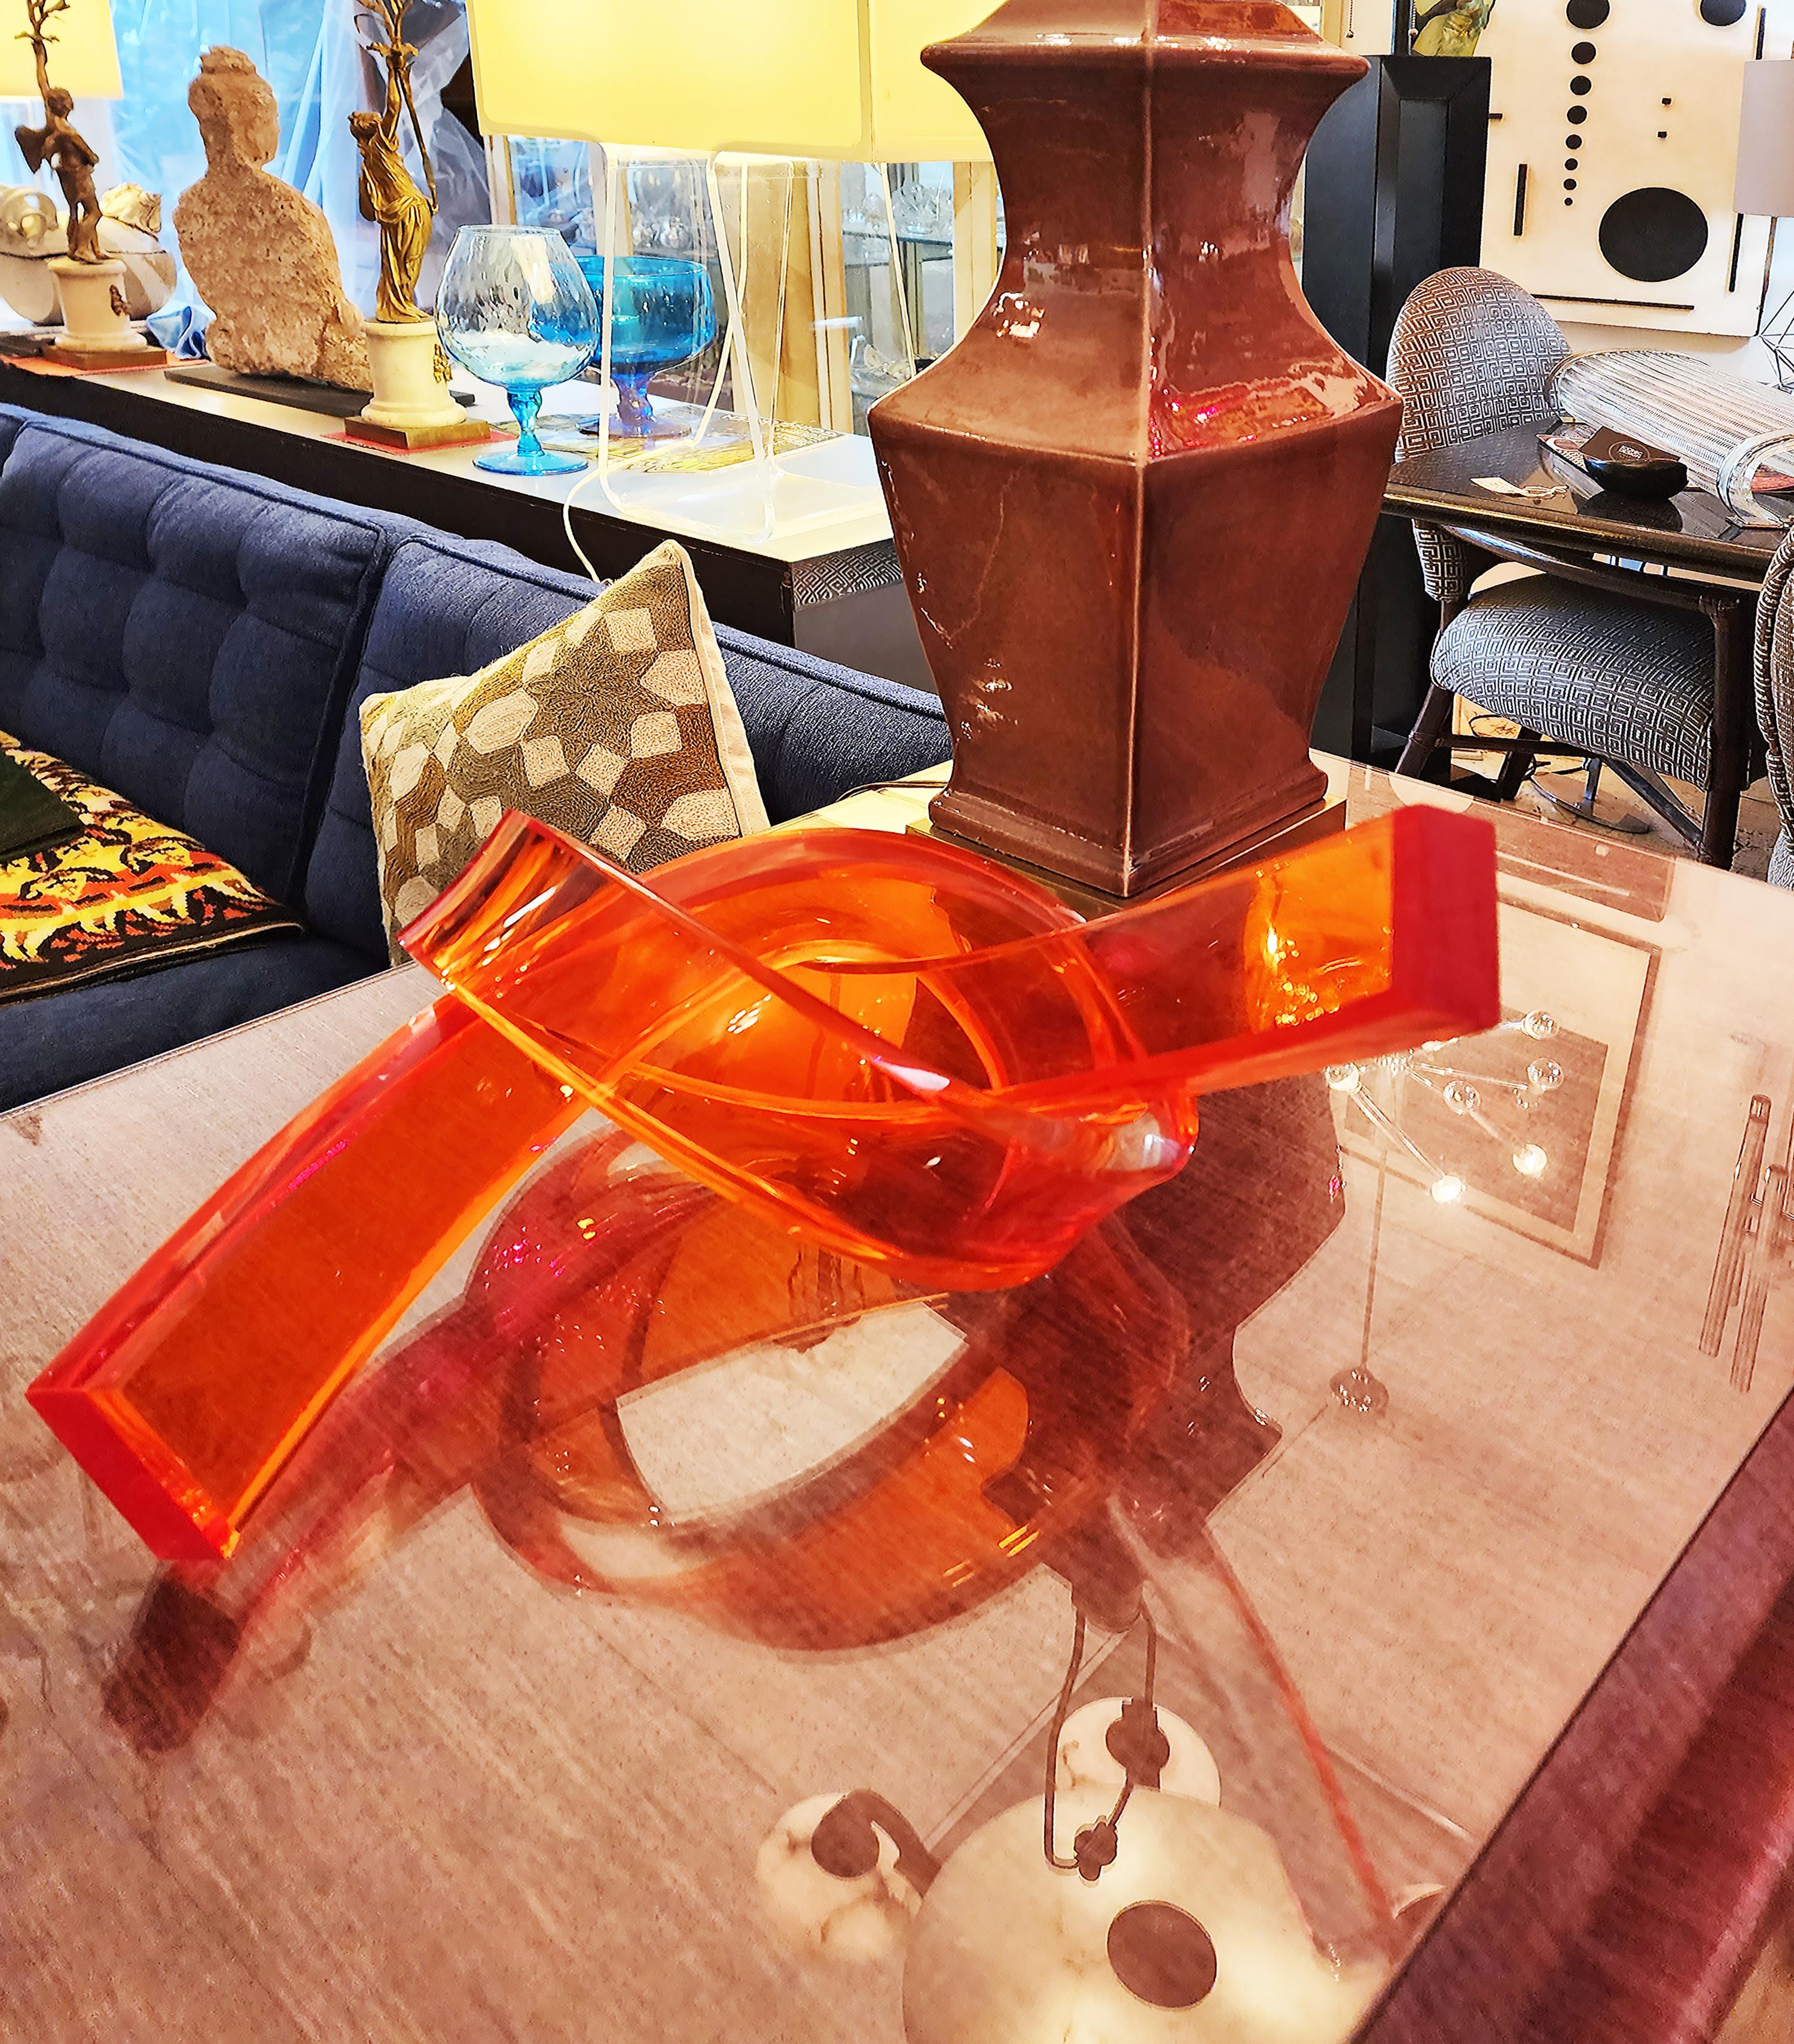 Iconic Design Thick Twisted Abstract Lucite Ribbon Sculpture, 2023

Offered for sale is a new 1-inch thick Lucite bi-color orange and clear twisted abstract table sculpture. The colors are laminated and create interesting results when viewed from